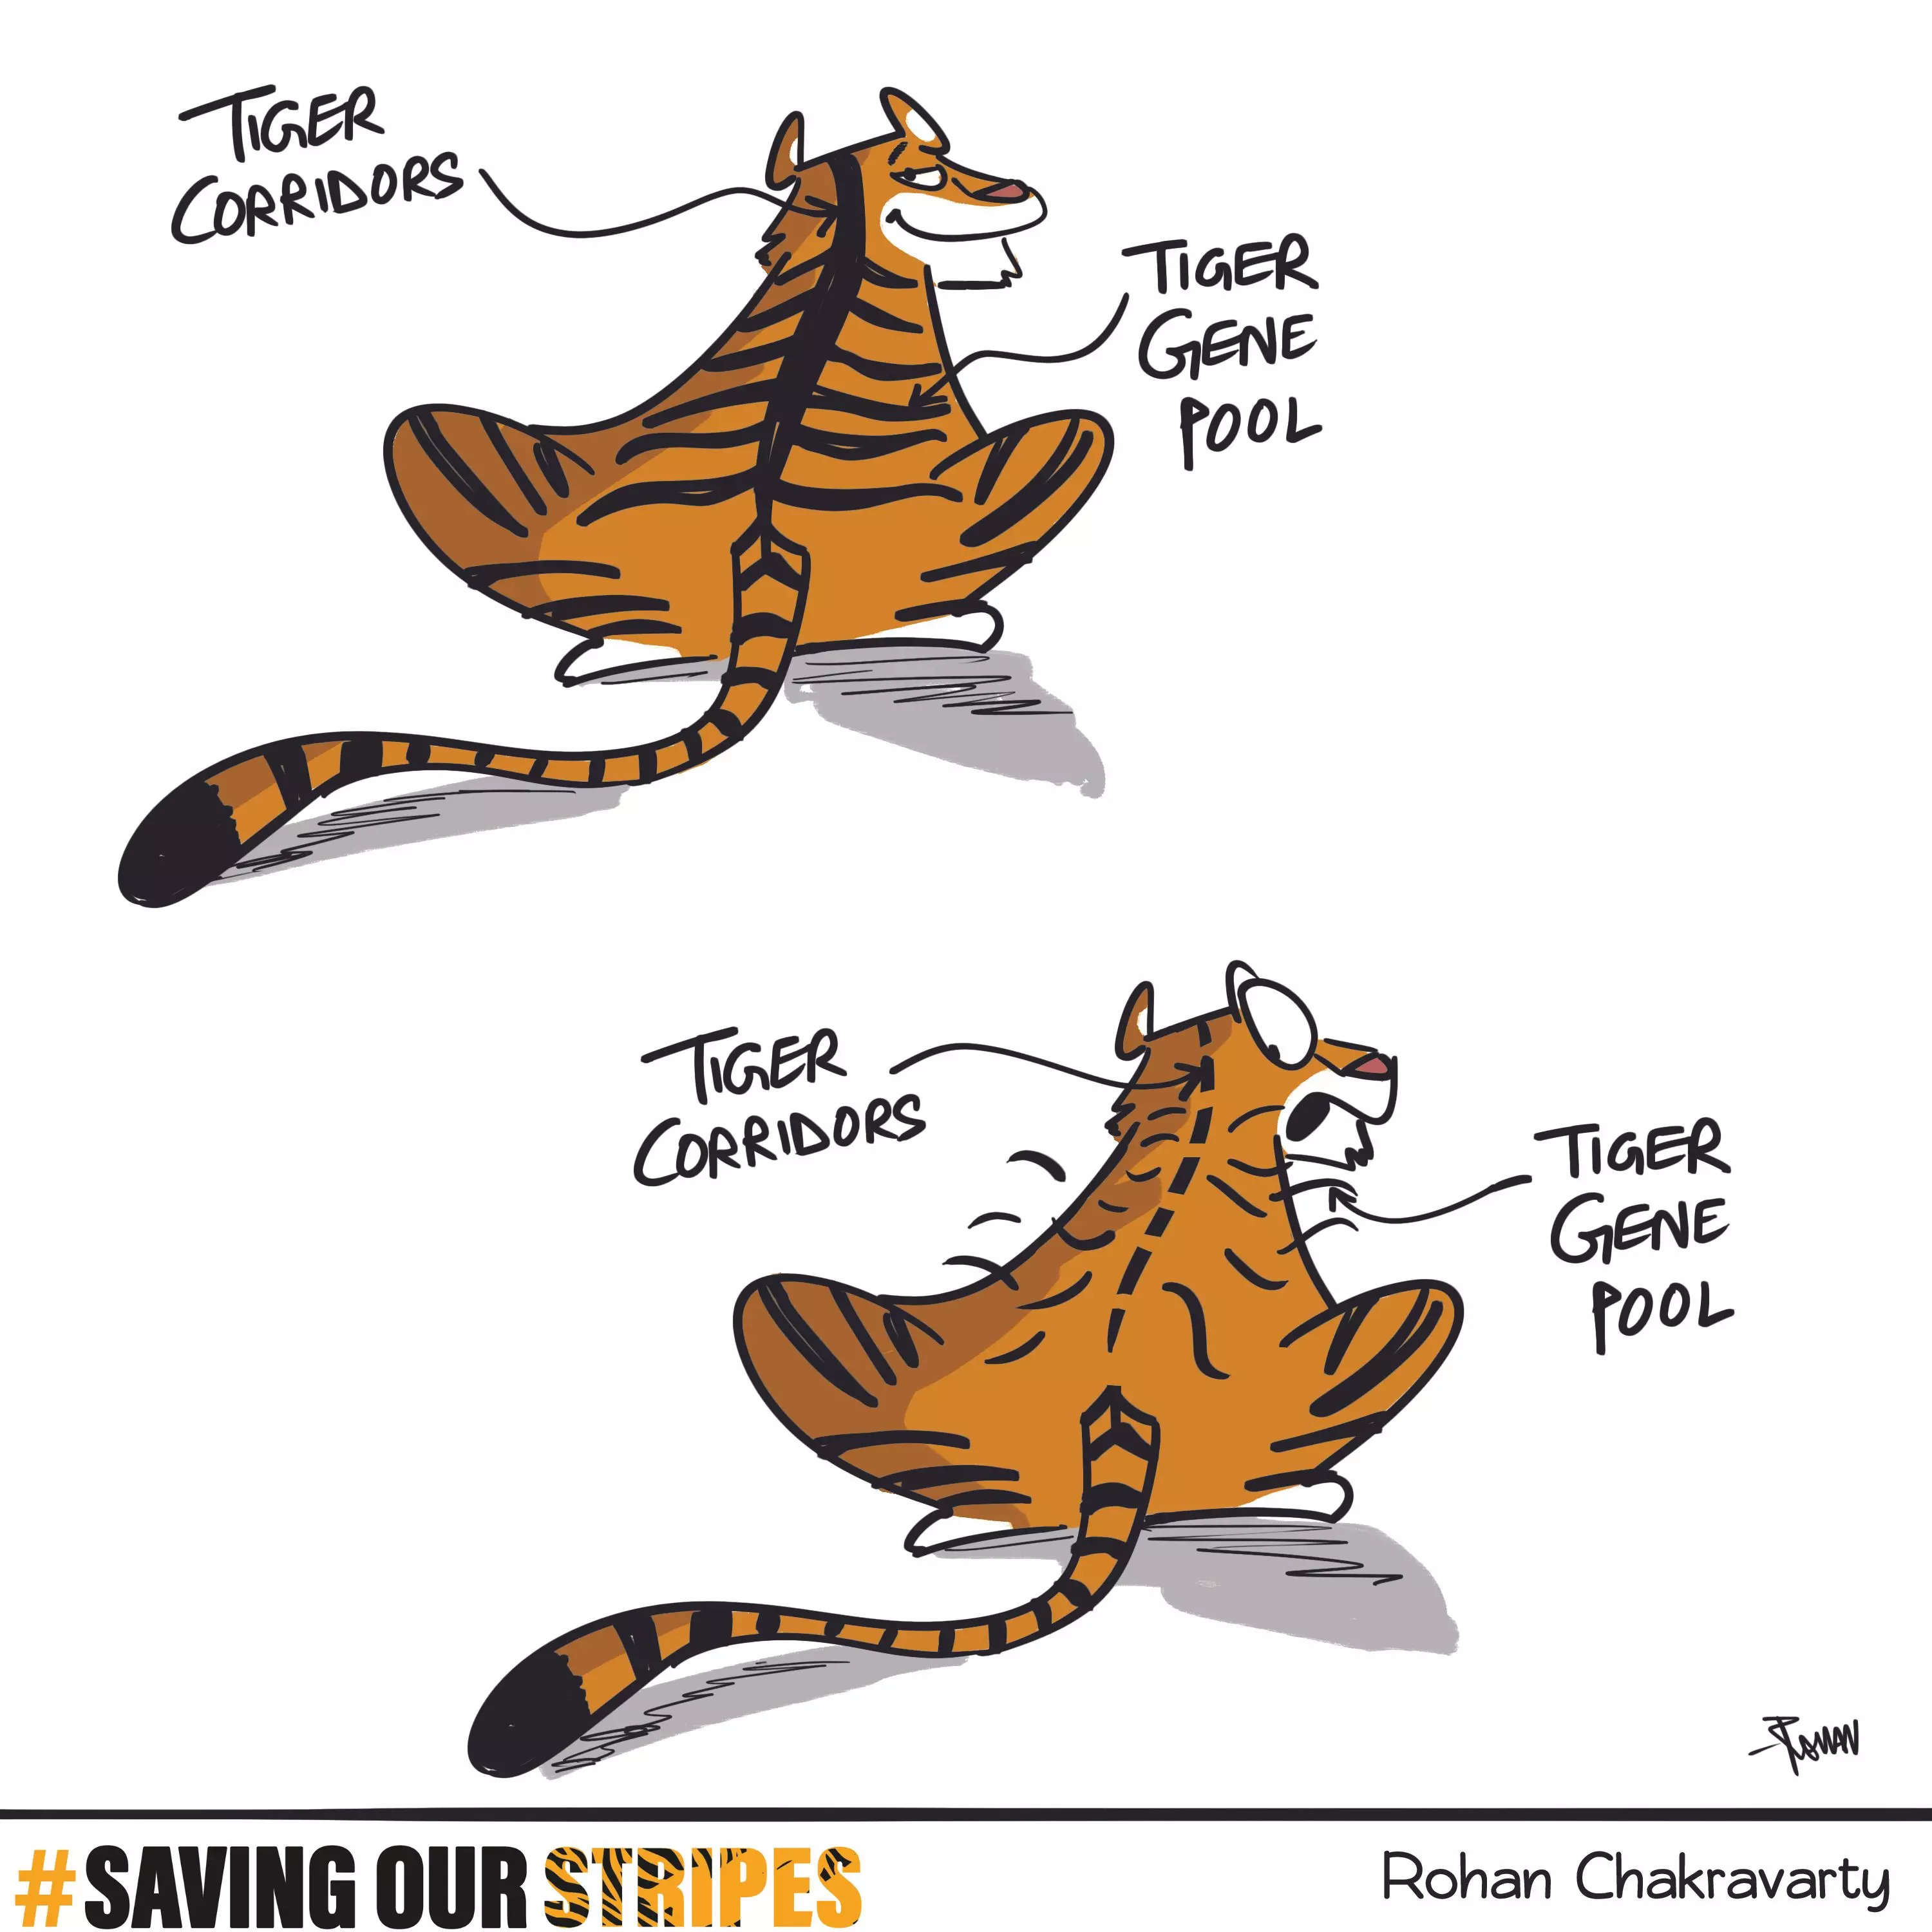 Tiger corridors and gene pool - it's not just science, it's our future. Let's make sure we don't lose our habitat connectivity and genetic diversity.